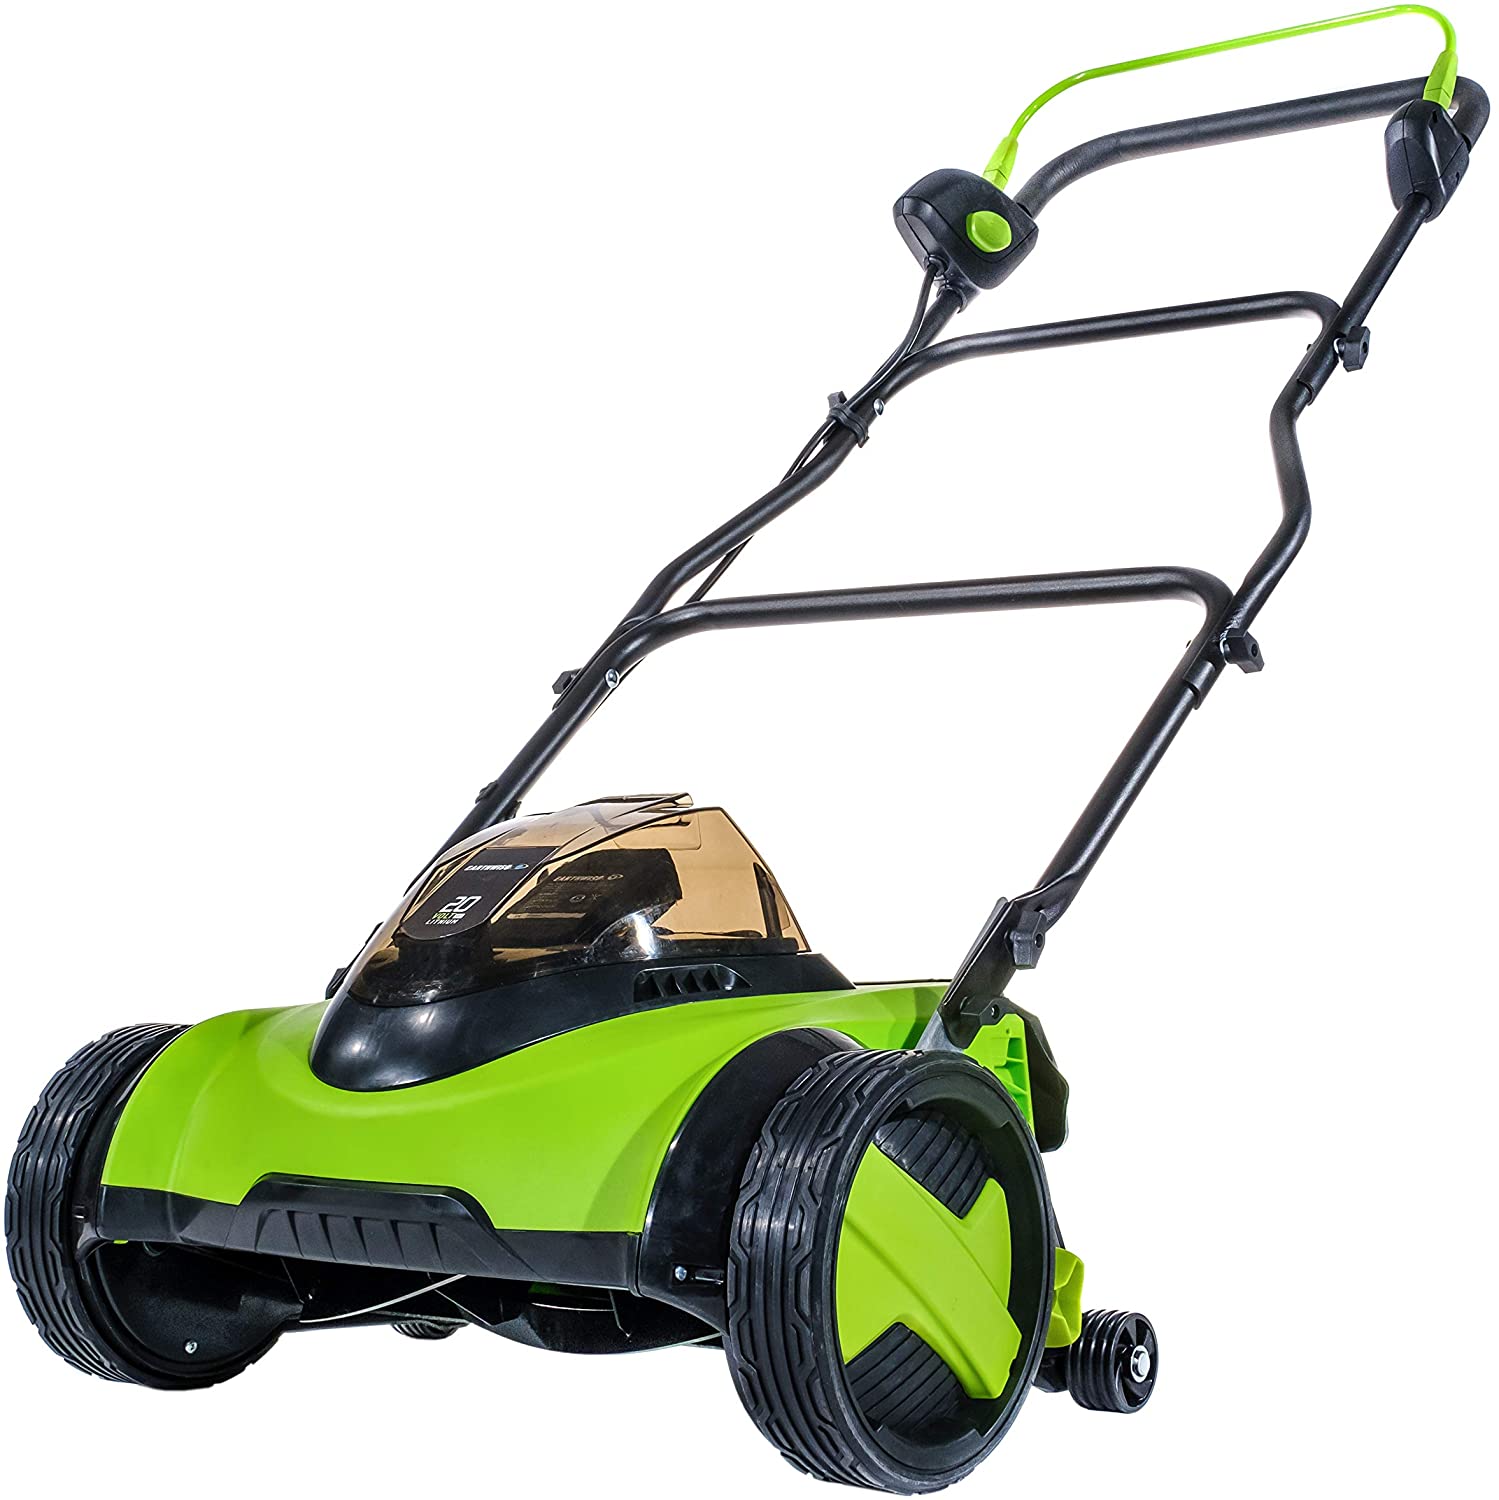 Earthwise Cordless Electric Reel Lawn Mower, 20V, 16-Inch Cut Width,  5-Position Height Adjustment, Includes Battery and Charger in the Reel Lawn  Mowers department at